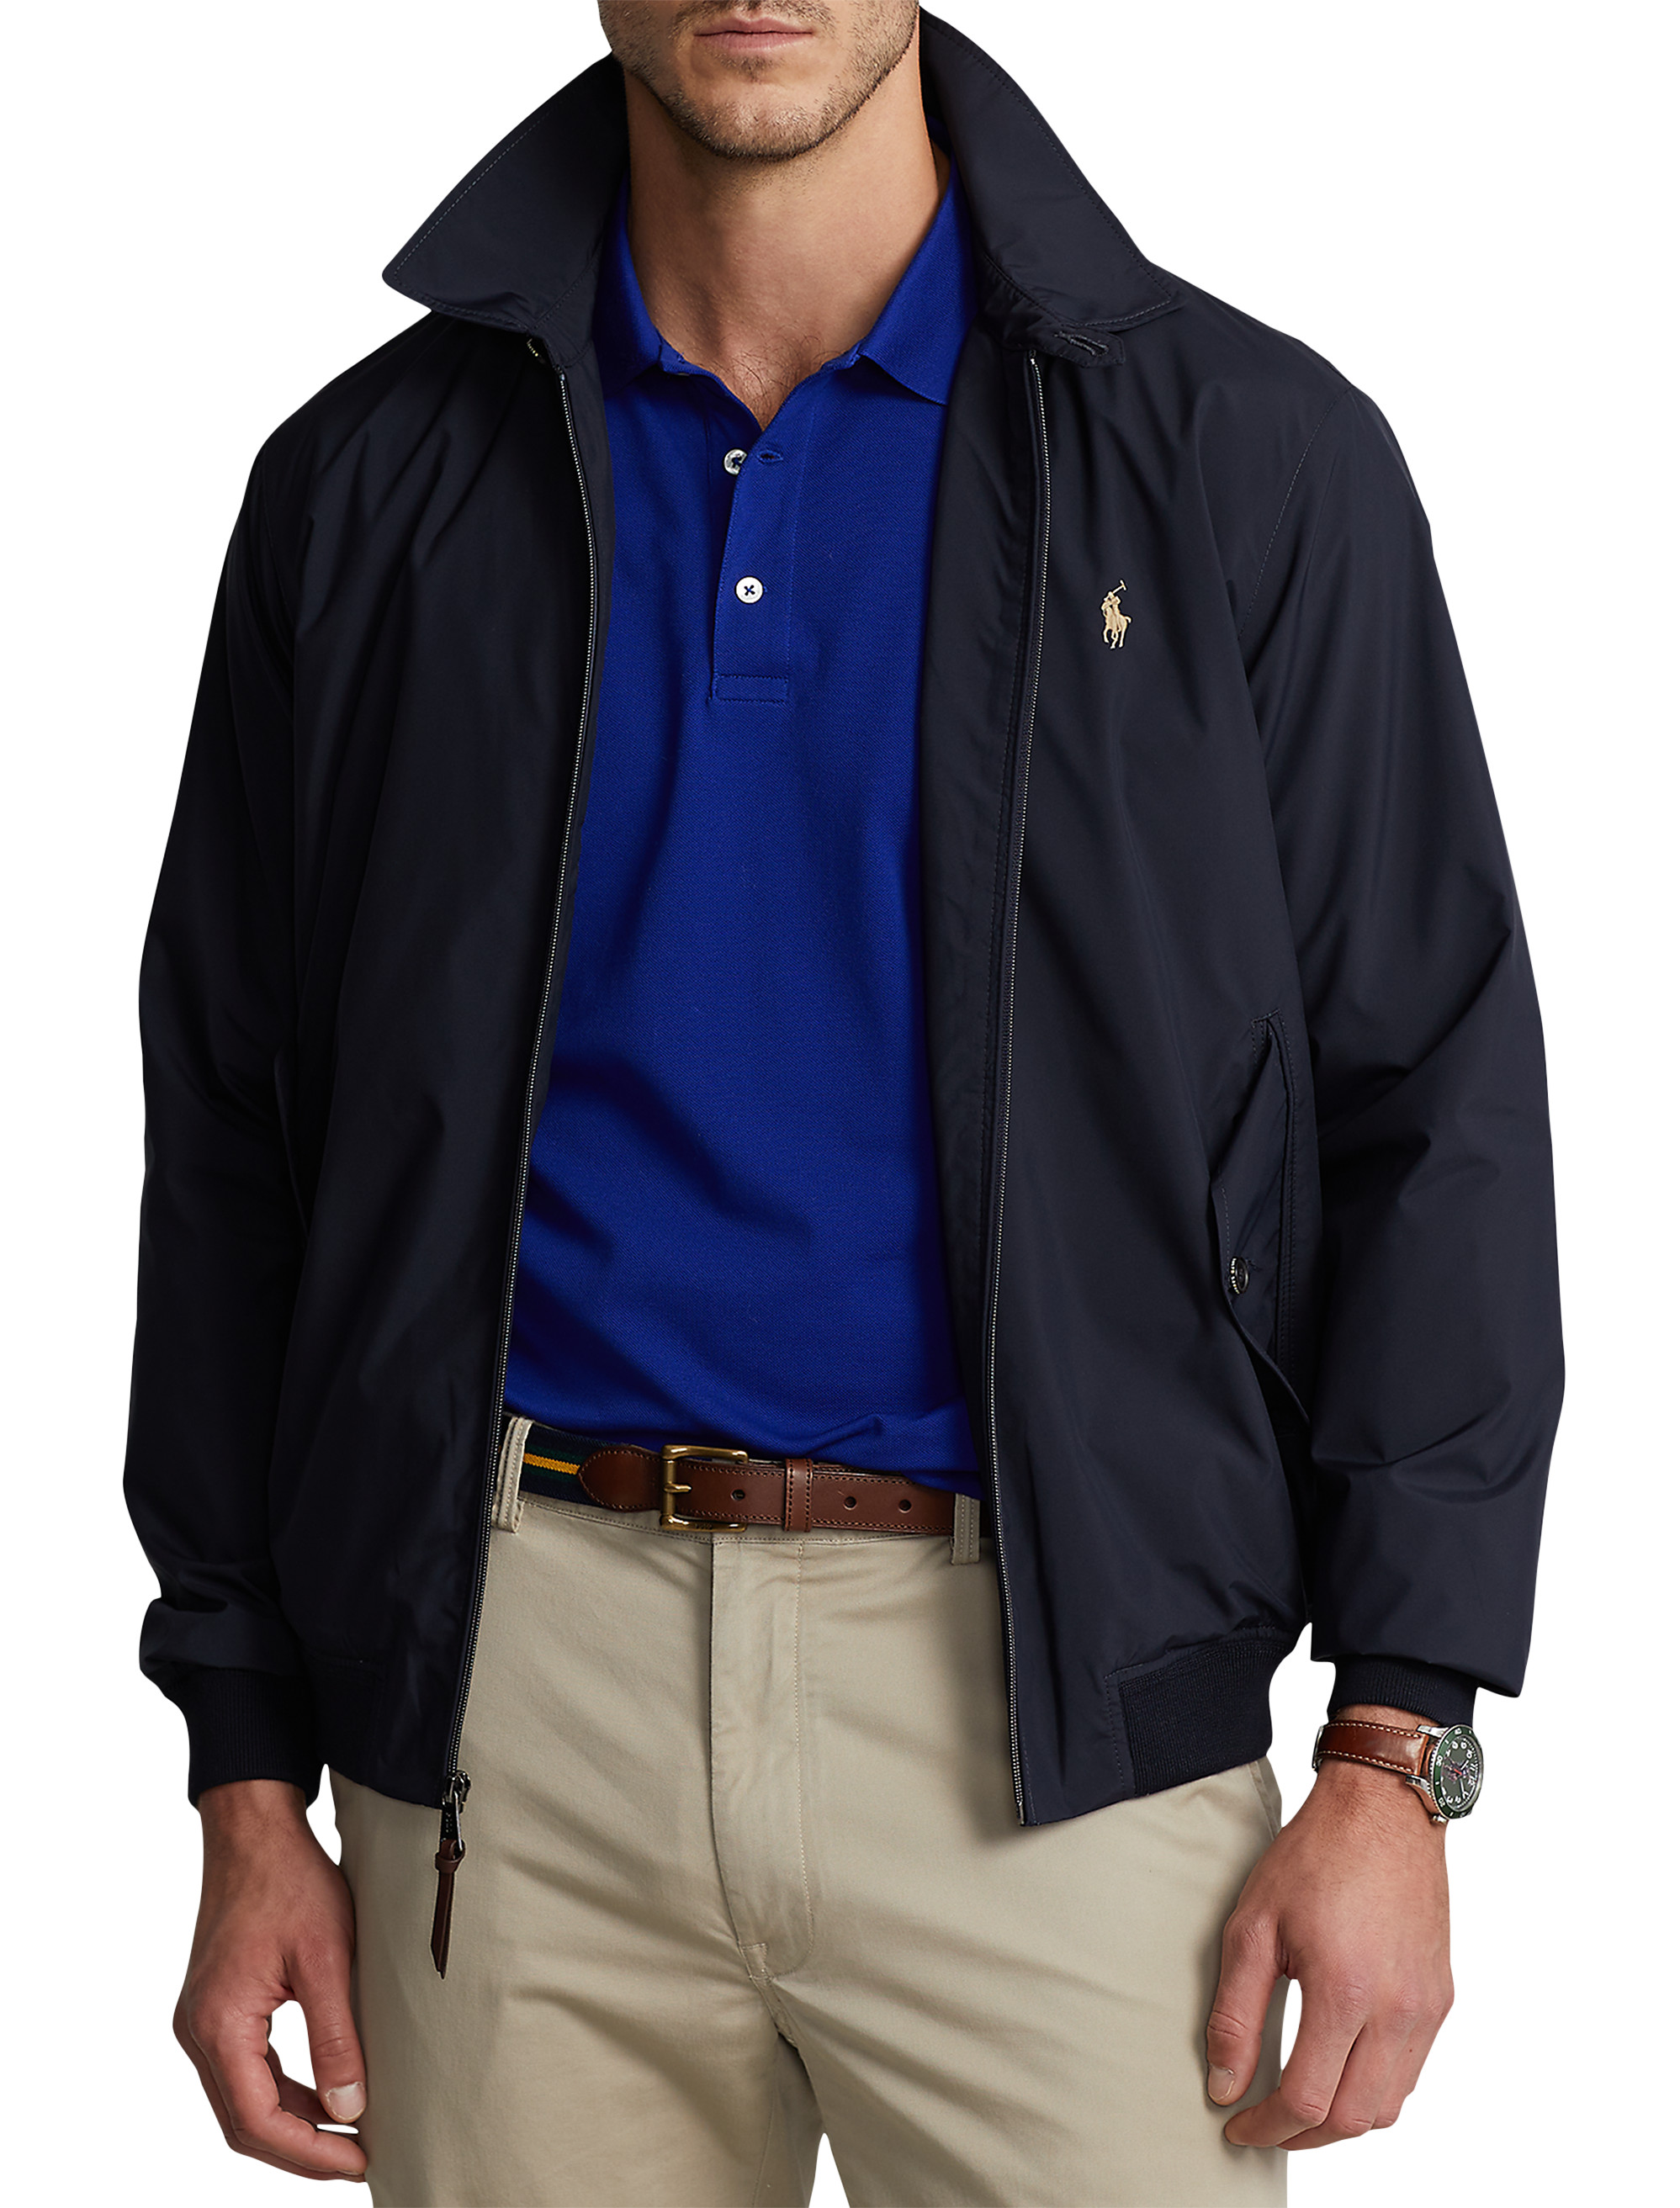 https://images.dxl.com/is/image/CasualMale/pB7807collection_navy?$product$